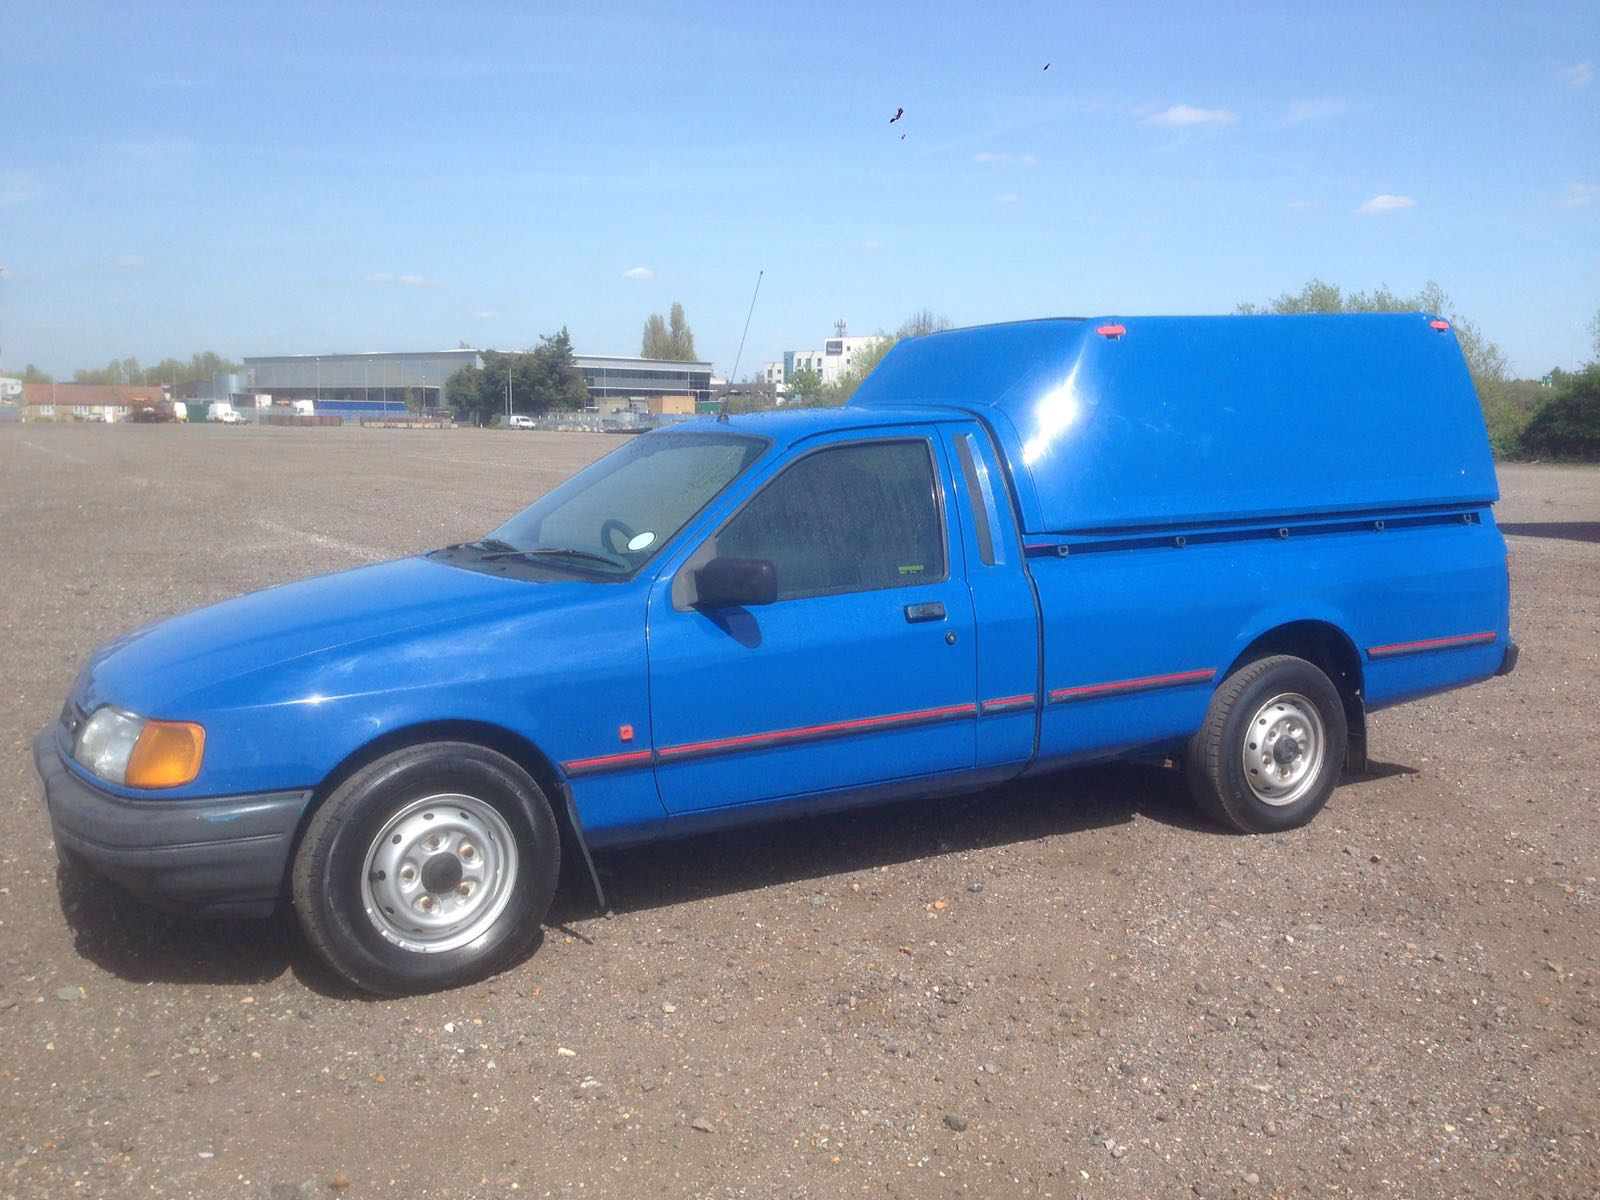 Ford P100 pickup, 1.8 turbo diesel 1991/J 39,000 miles with truckman top